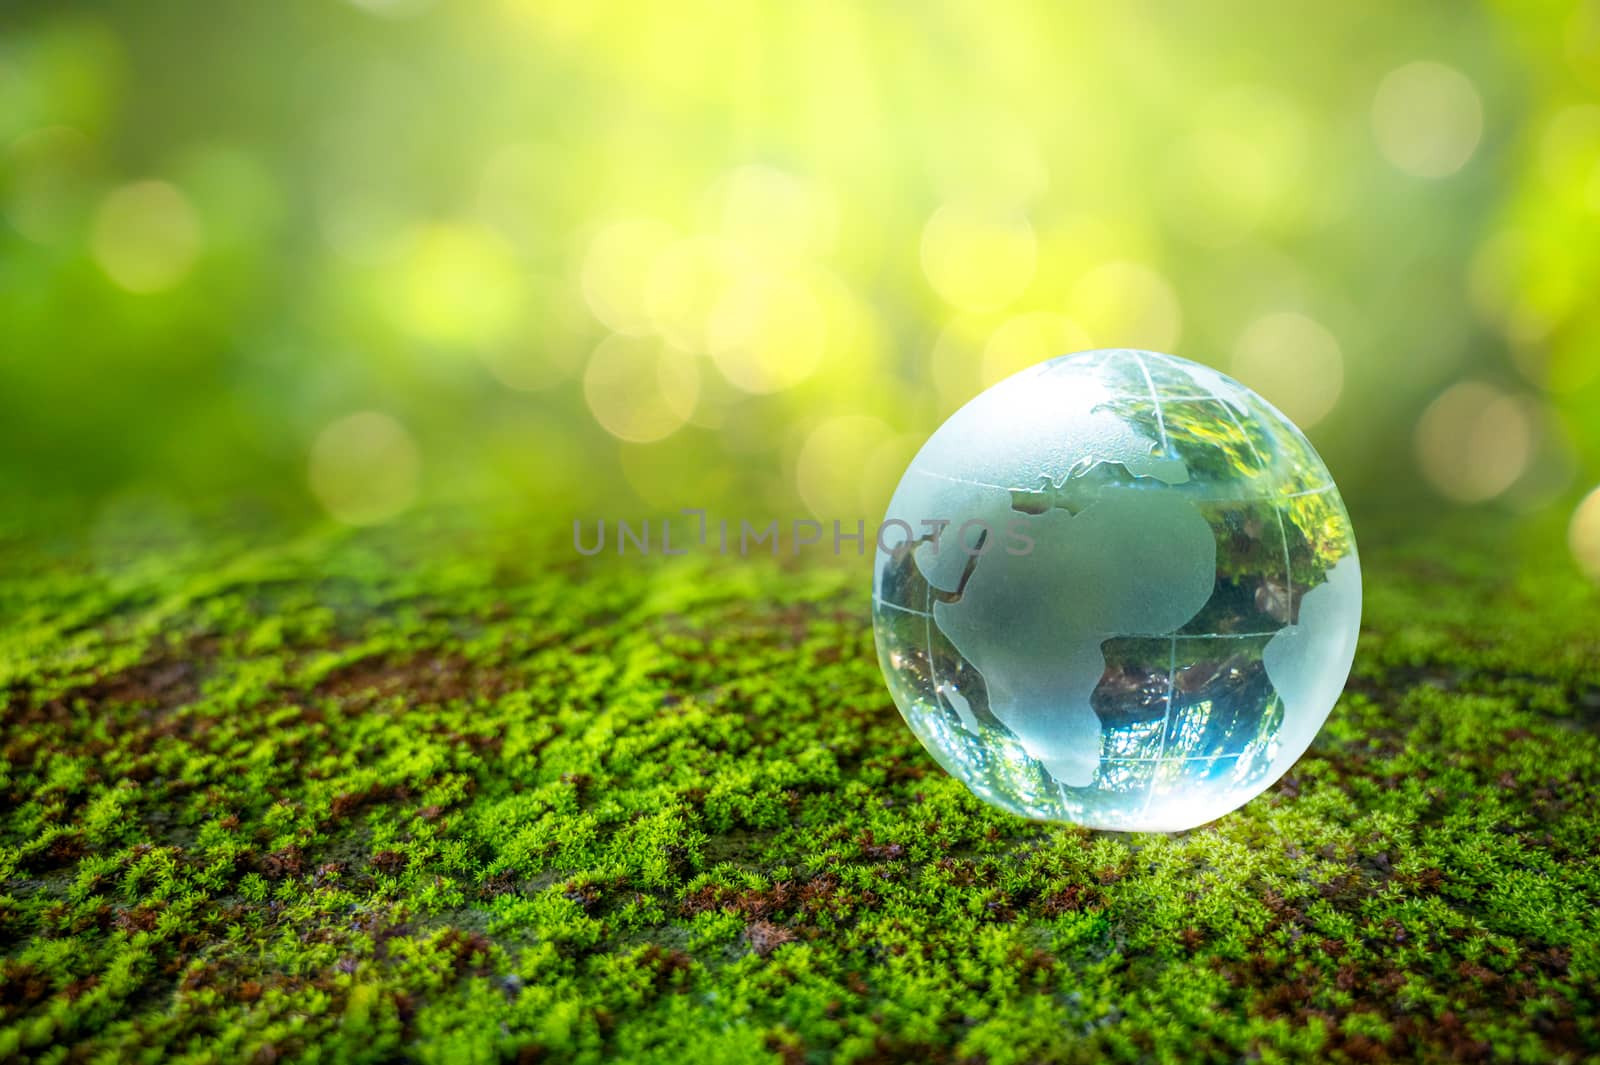 The crystal ball stands on the green grass. Concept day earth Save the world save environment